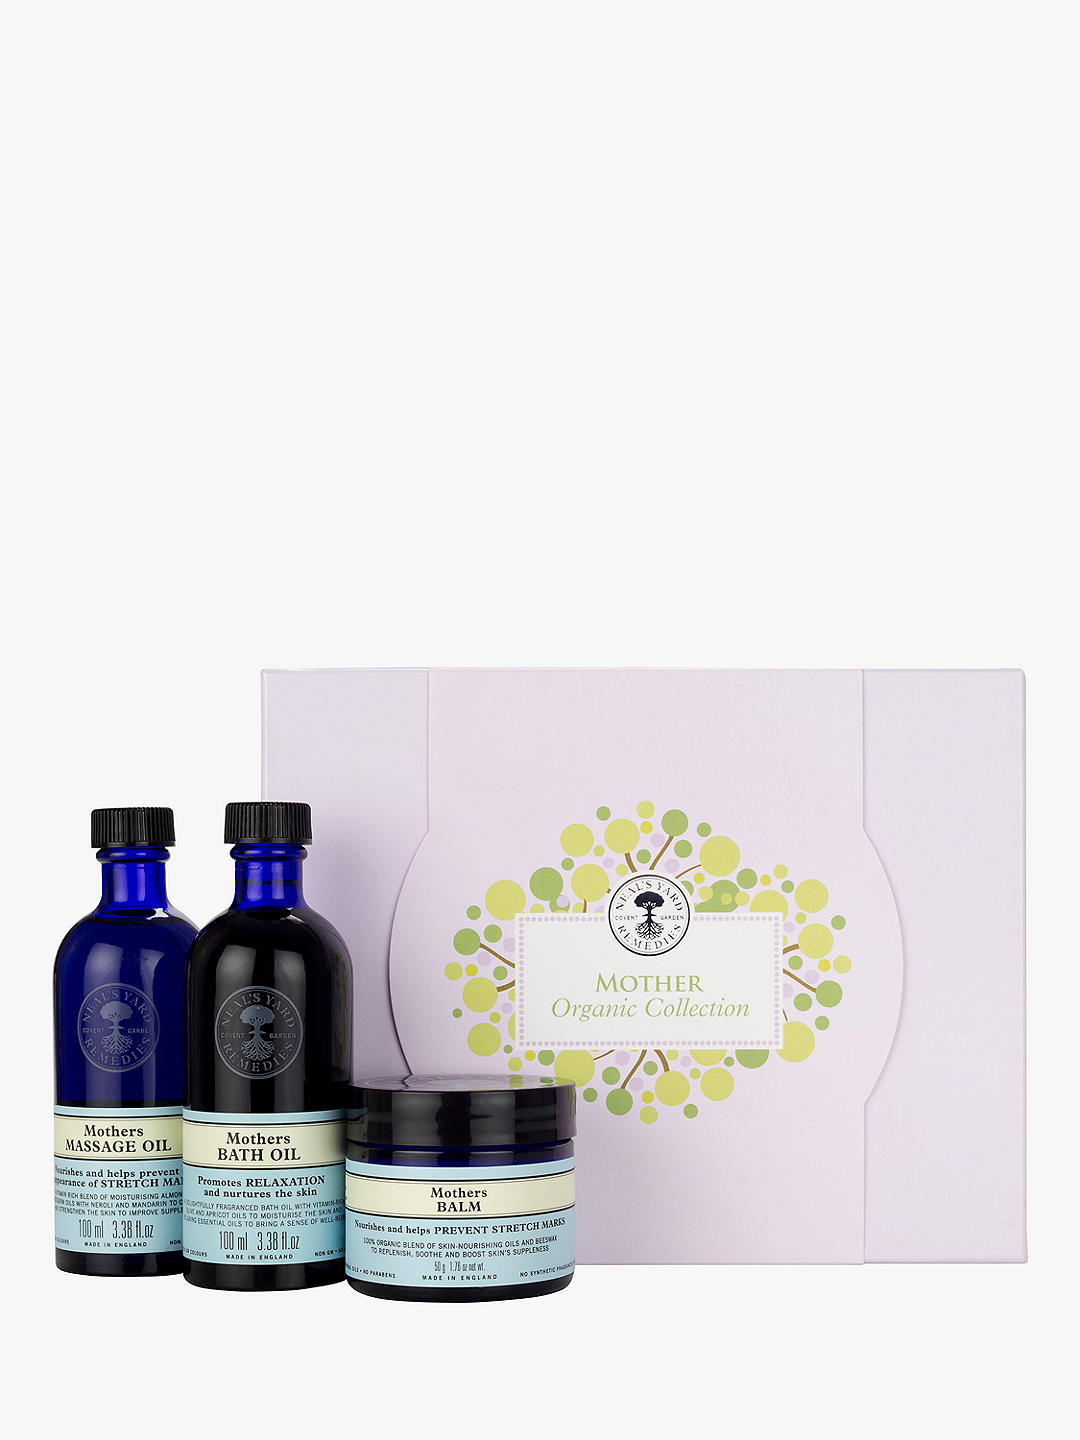 Neal's Yard Remedies Mother's Organic Collection 1